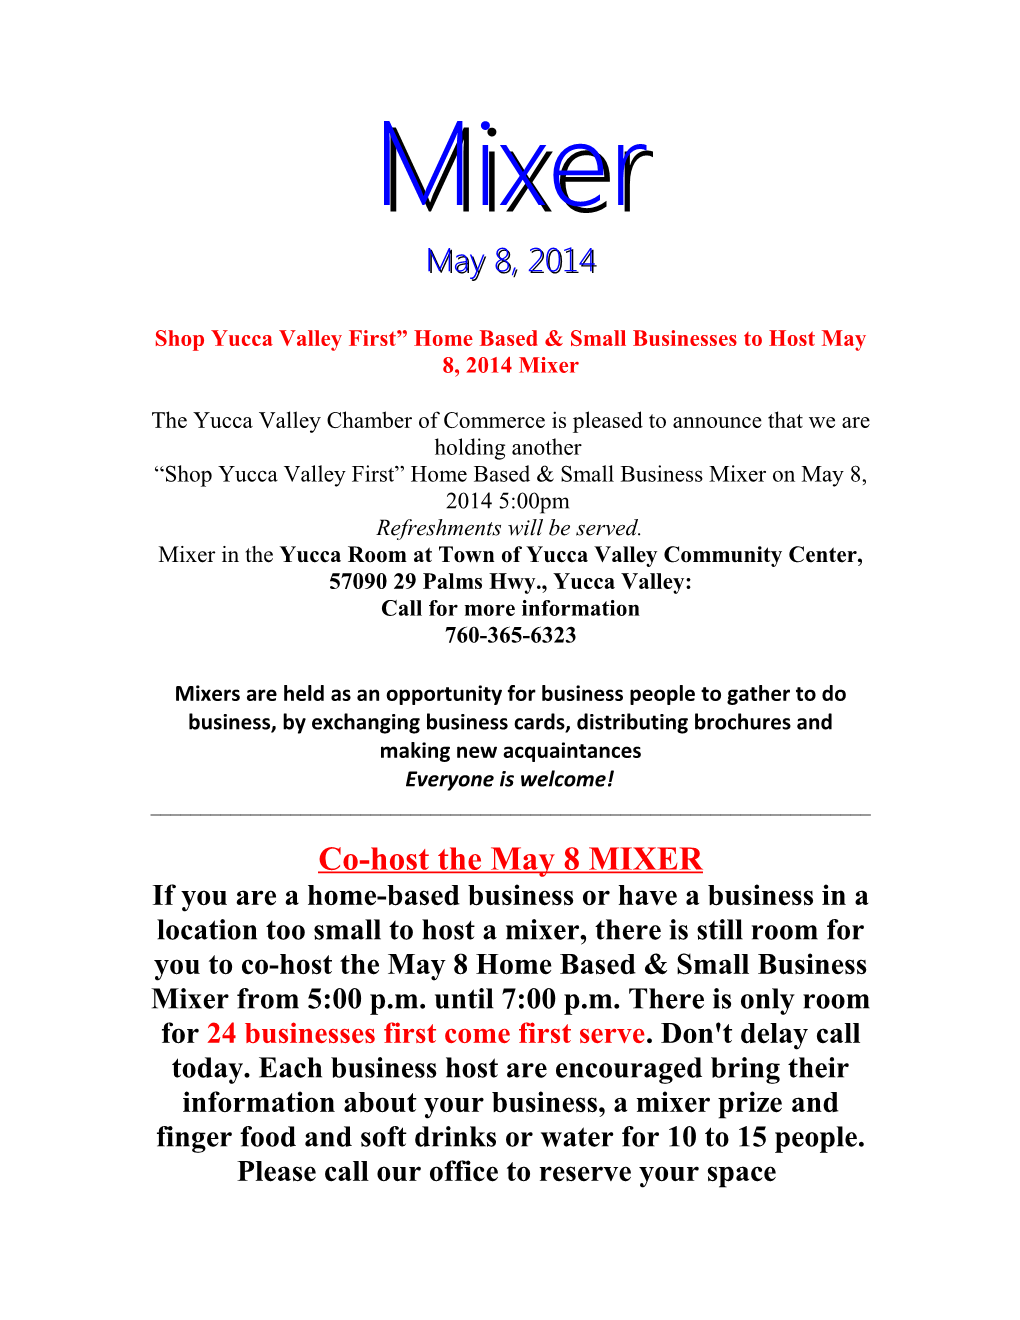 Shop Yucca Valley First Home Based & Small Businesses to Host May 8, 2014 Mixer